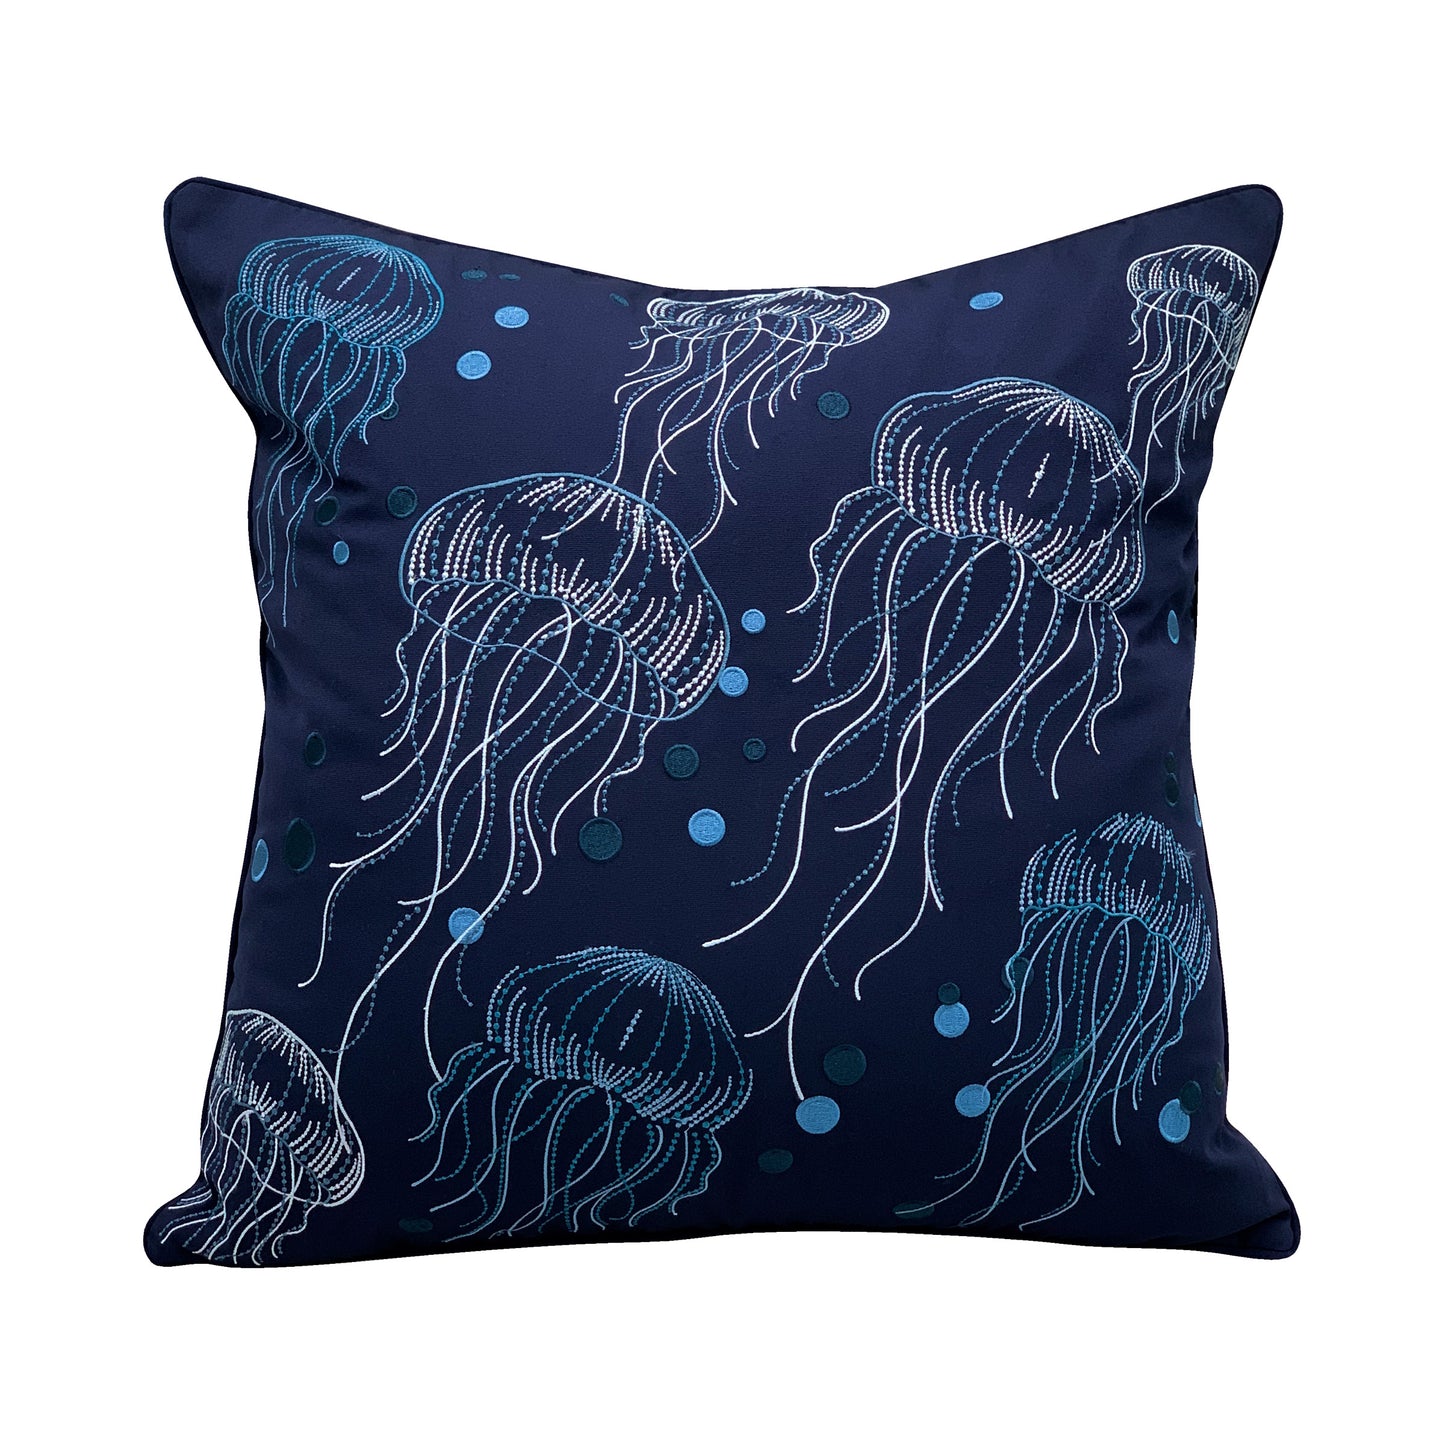 Eight jelly fish in various sizes floating through bubbles embroidered on a navy blue background. Pillow is finished with navy blue piped edging.